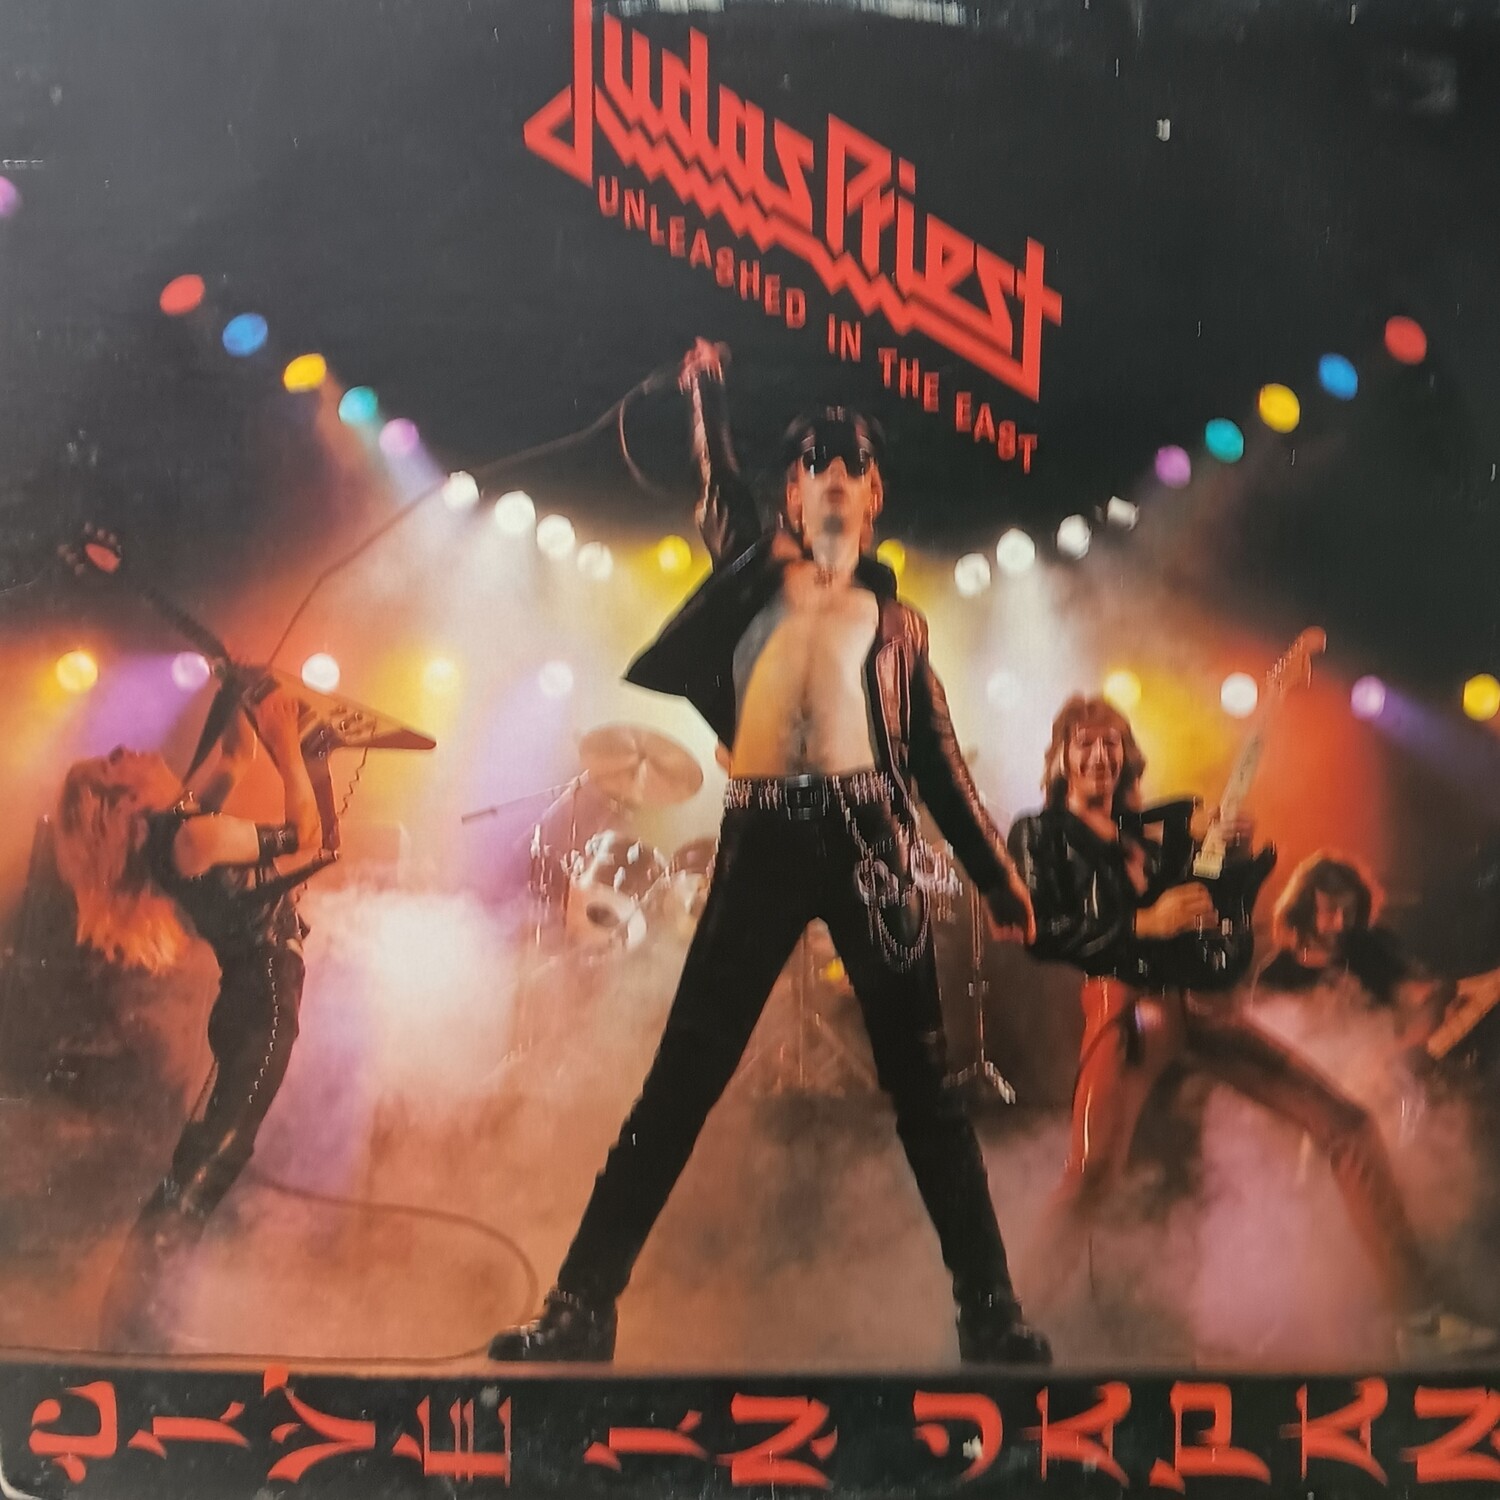 JUDAS PRIEST - Unleashed in the east